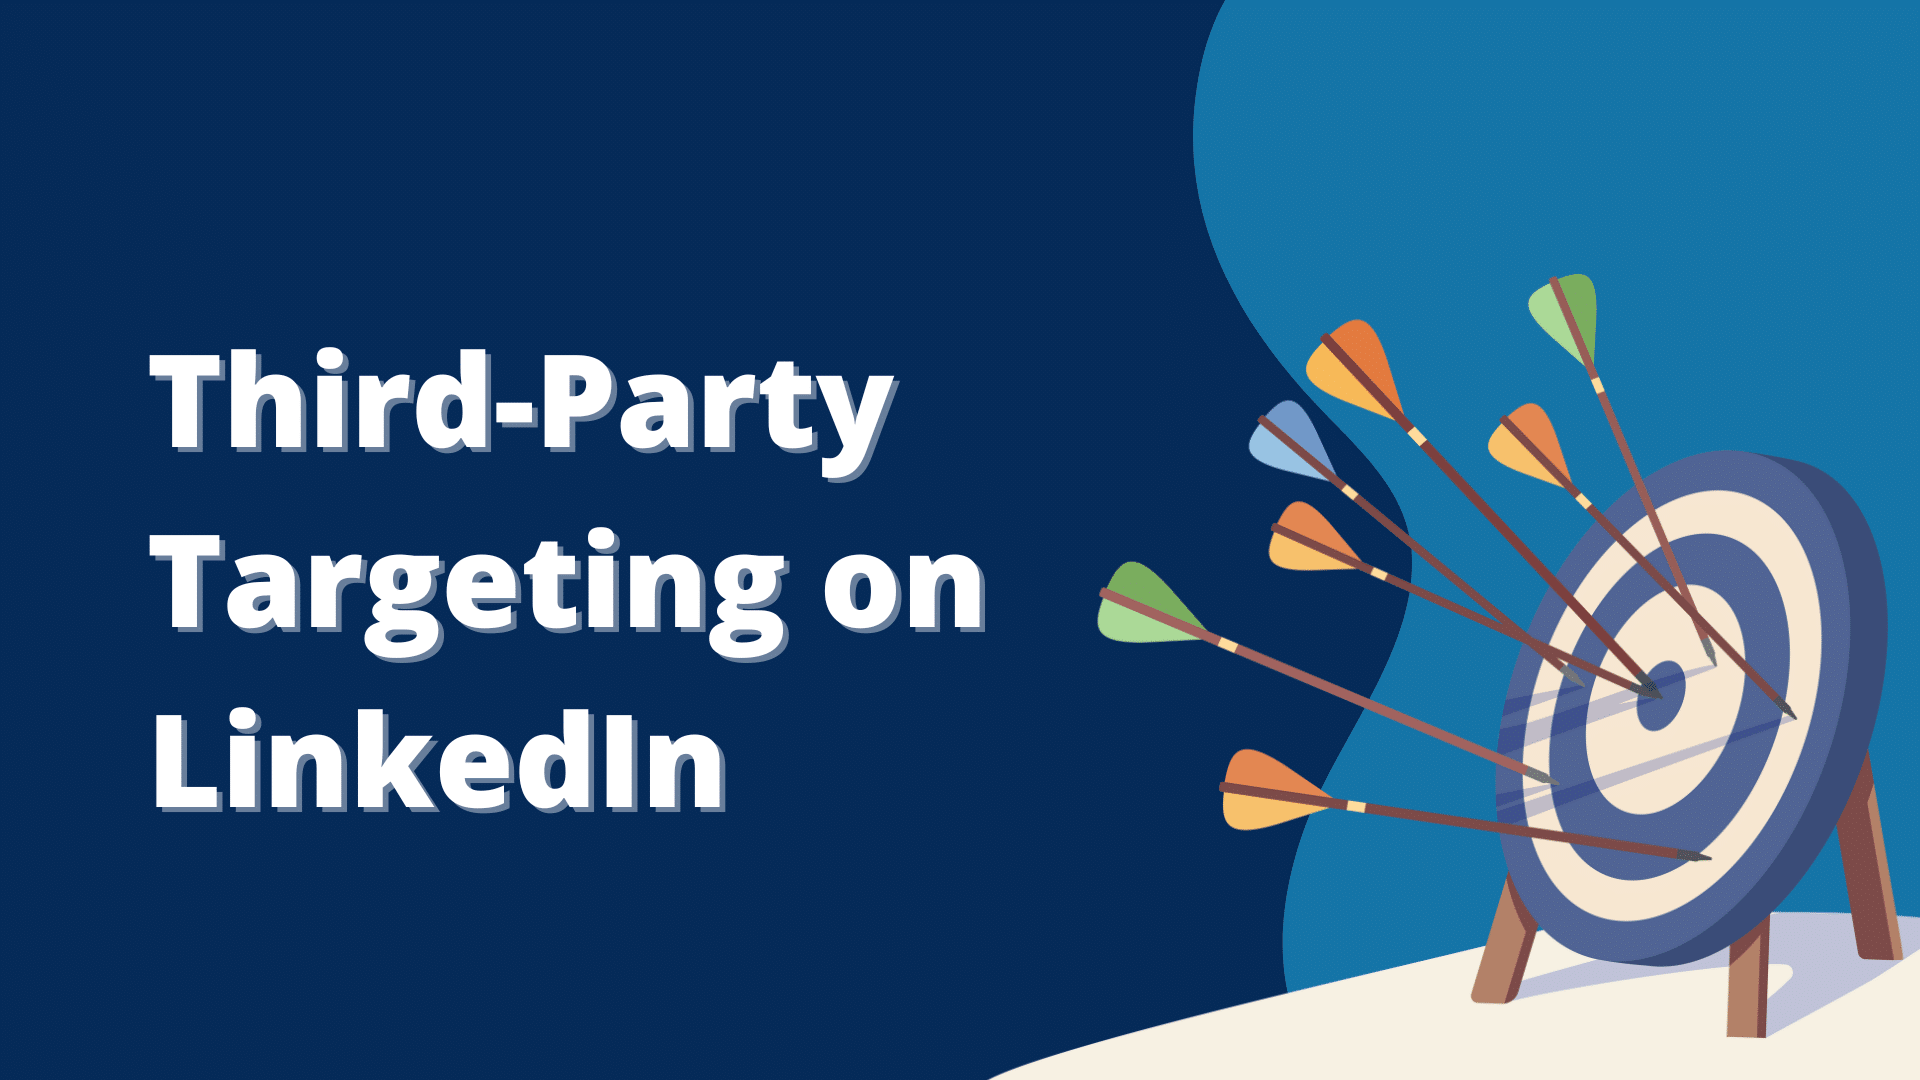 Third-Party Targeting on LinkedIn